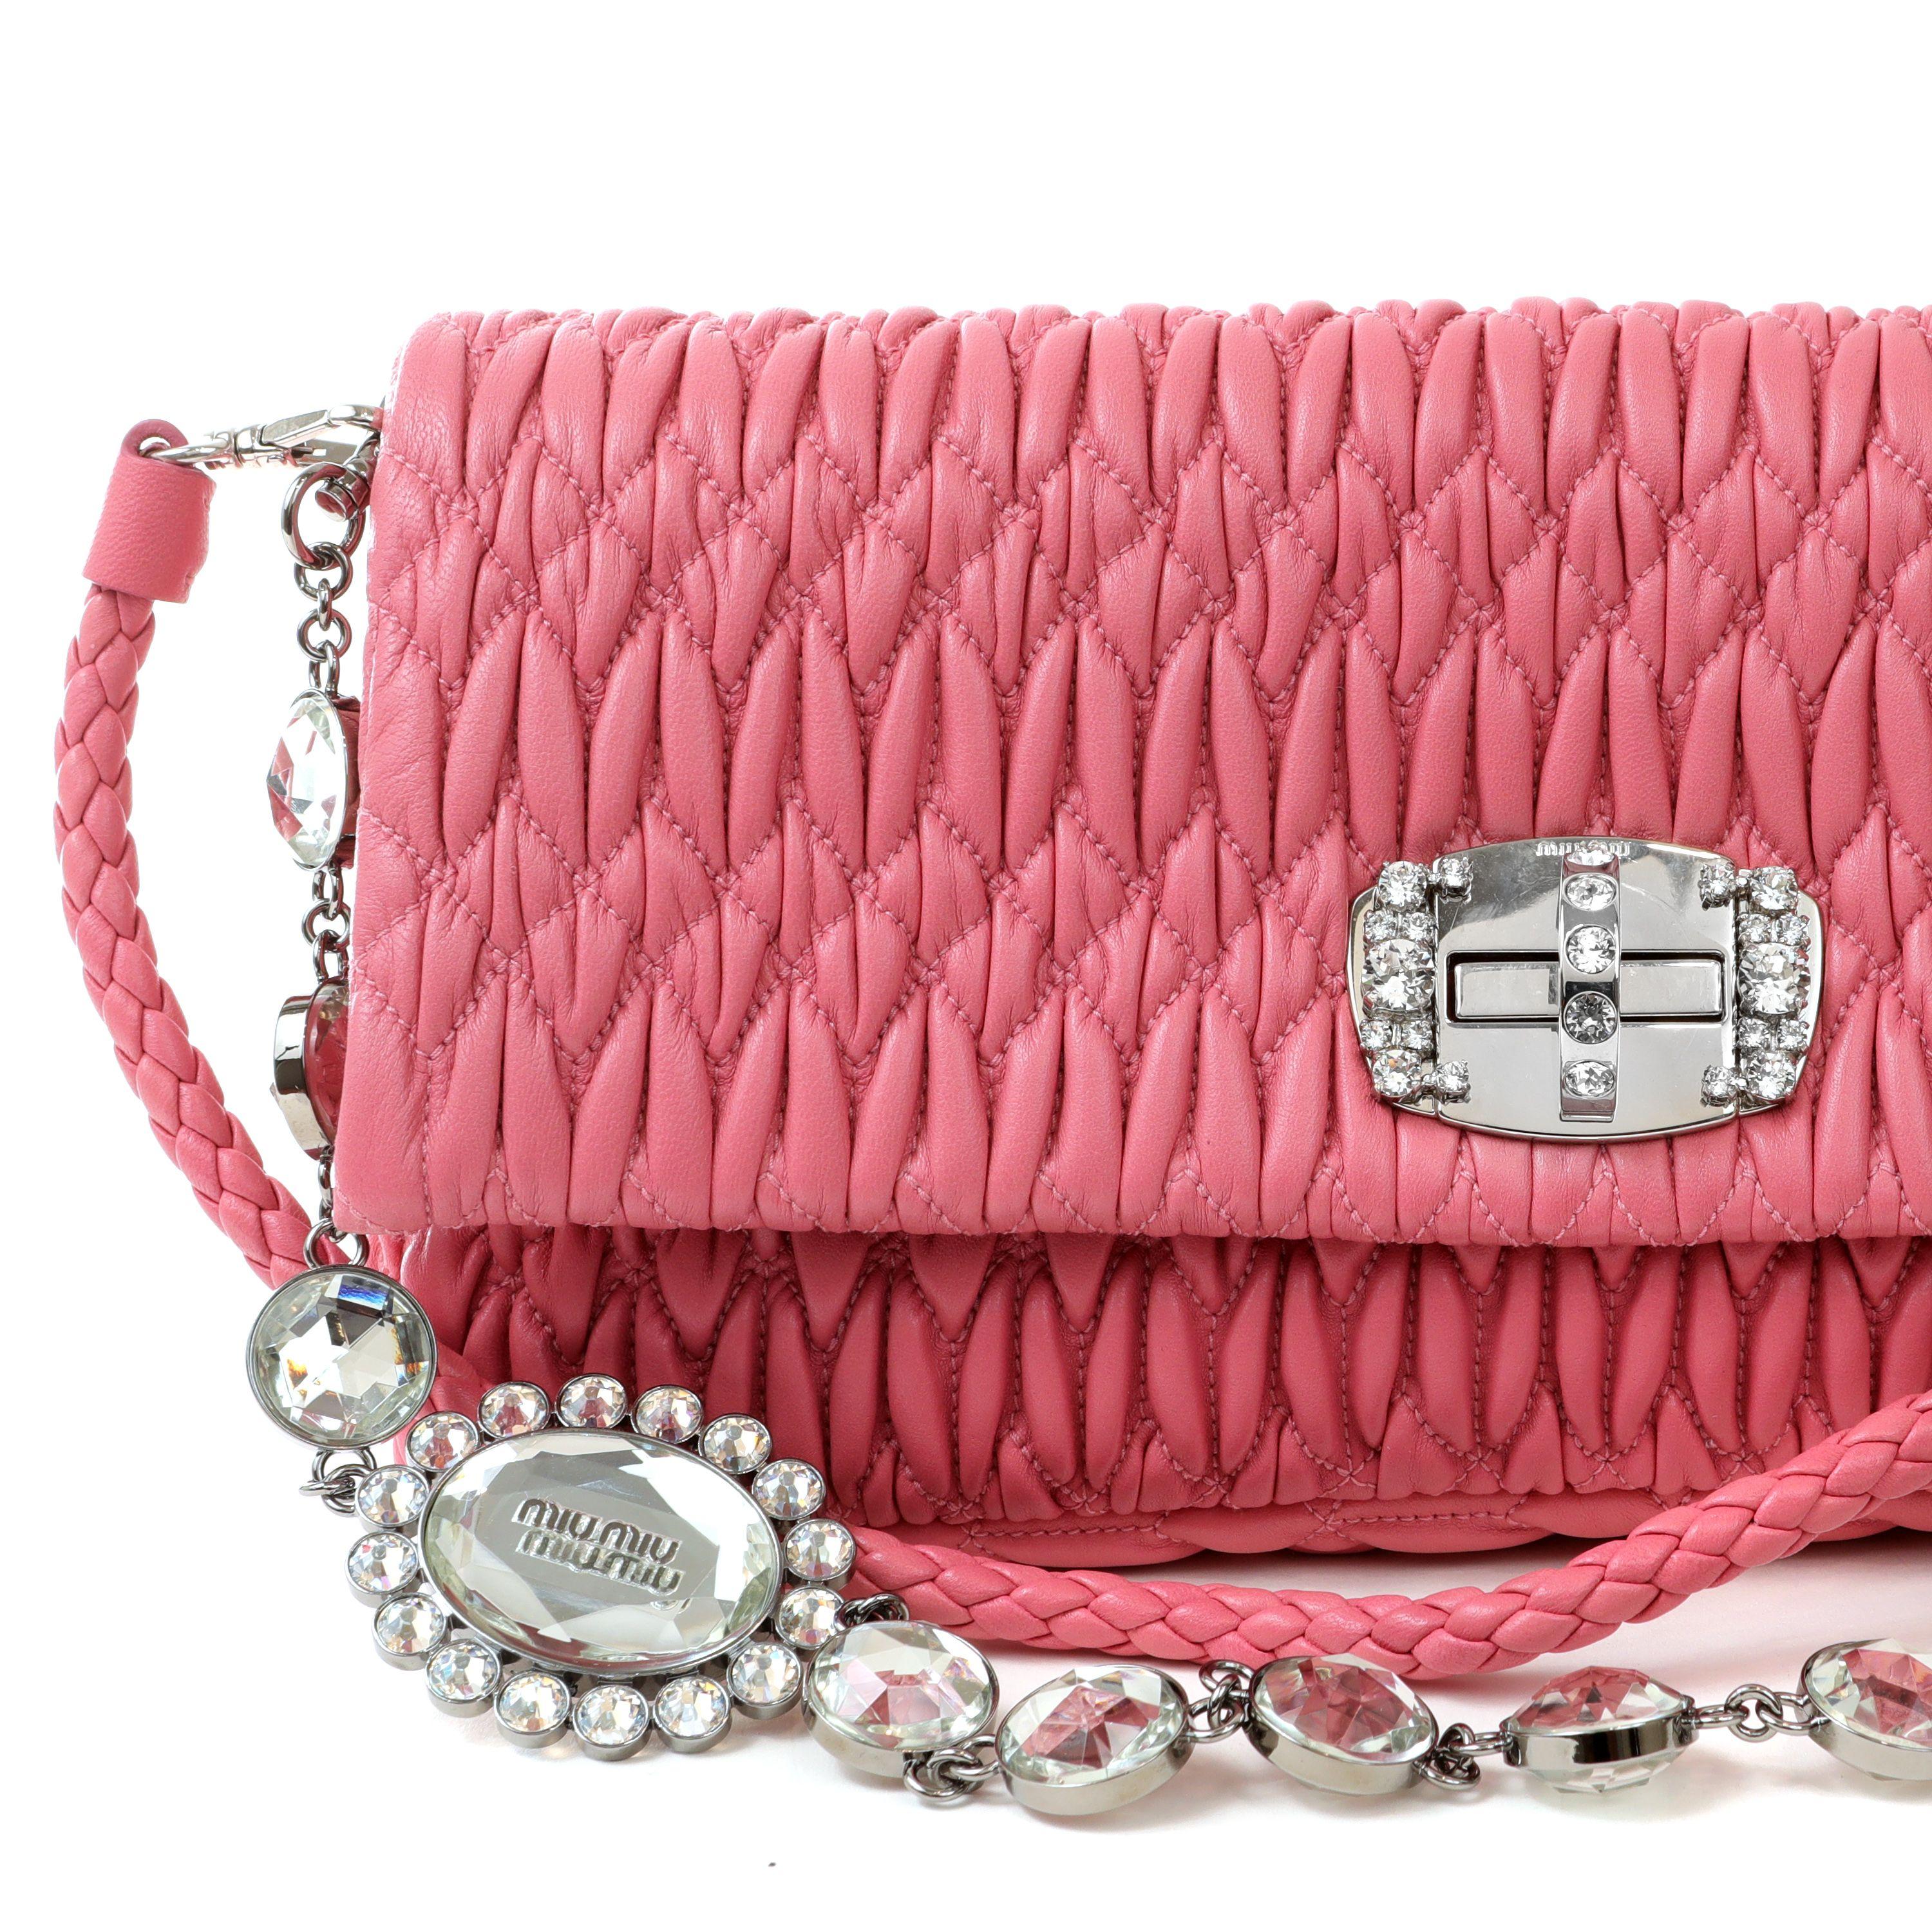 This authentic Miu Miu Rose Pink Crystal Cloquè Small Bag is in pristine condition.  The iconic design features deep pink quilted Nappa leather and a crystal turn lock closure.  May be carried by the detachable leather strap or the decorative